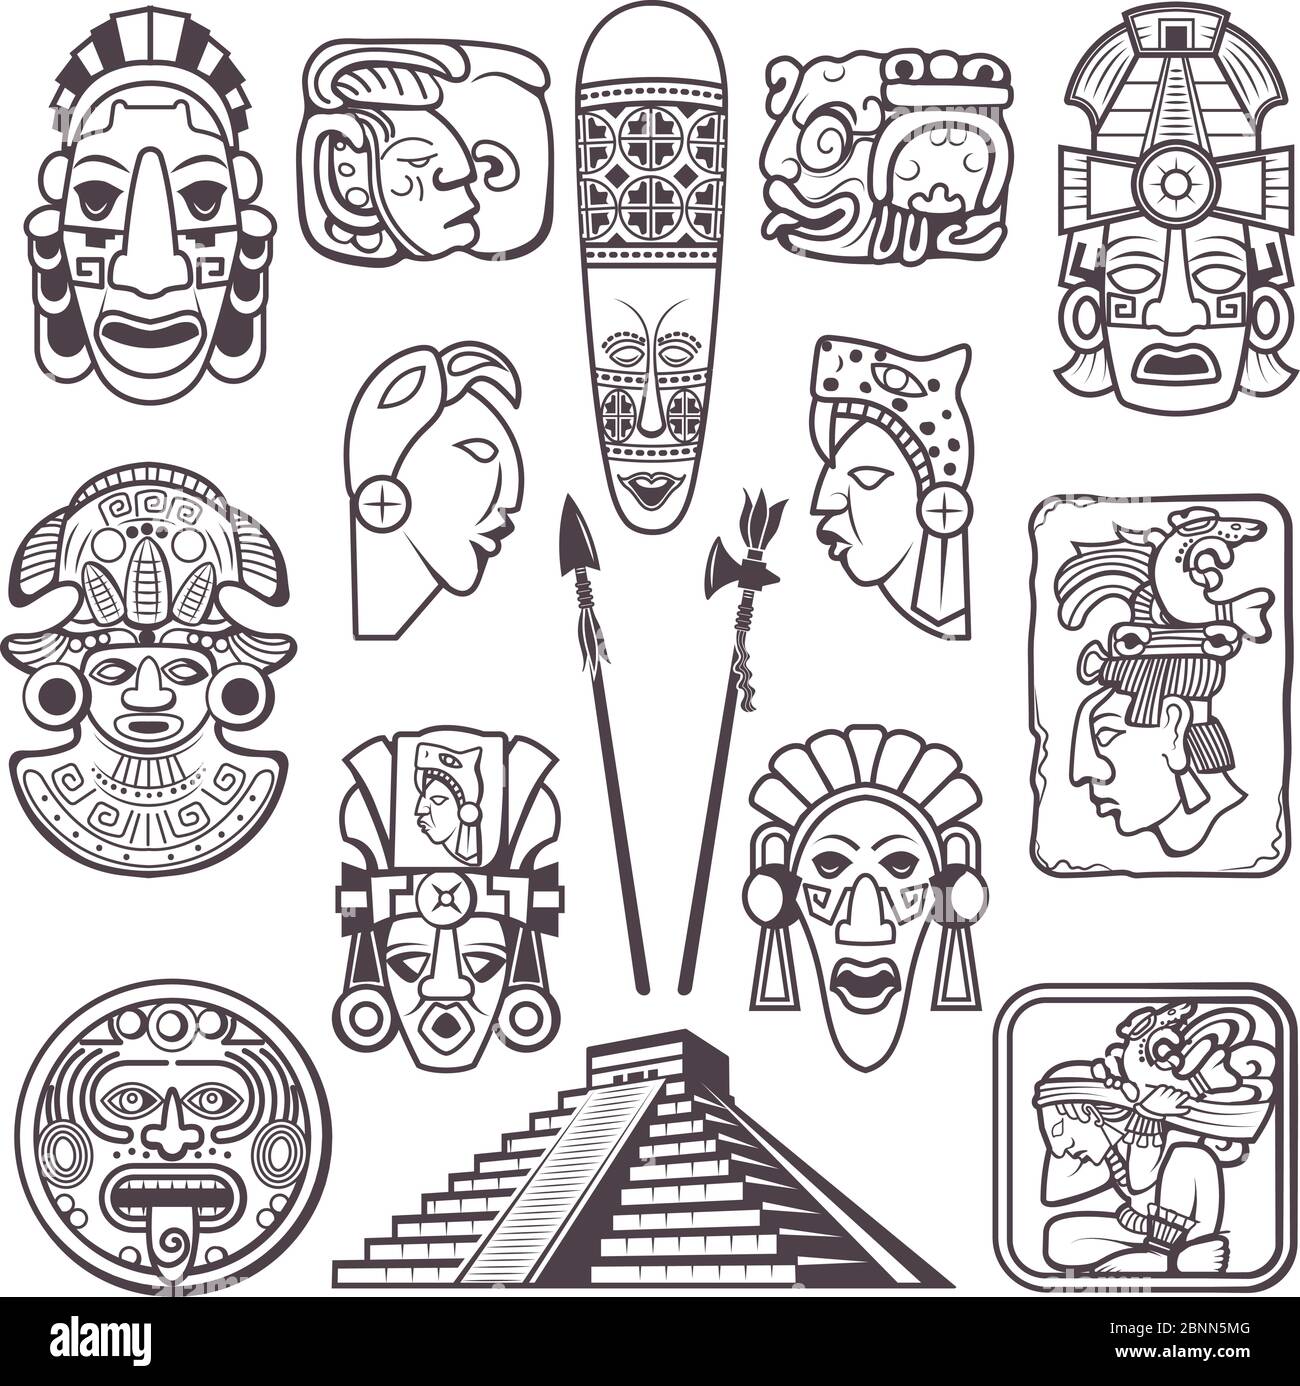 Monochrome pictures set of mayan culture symbols. Tribal masks and totems Stock Vector